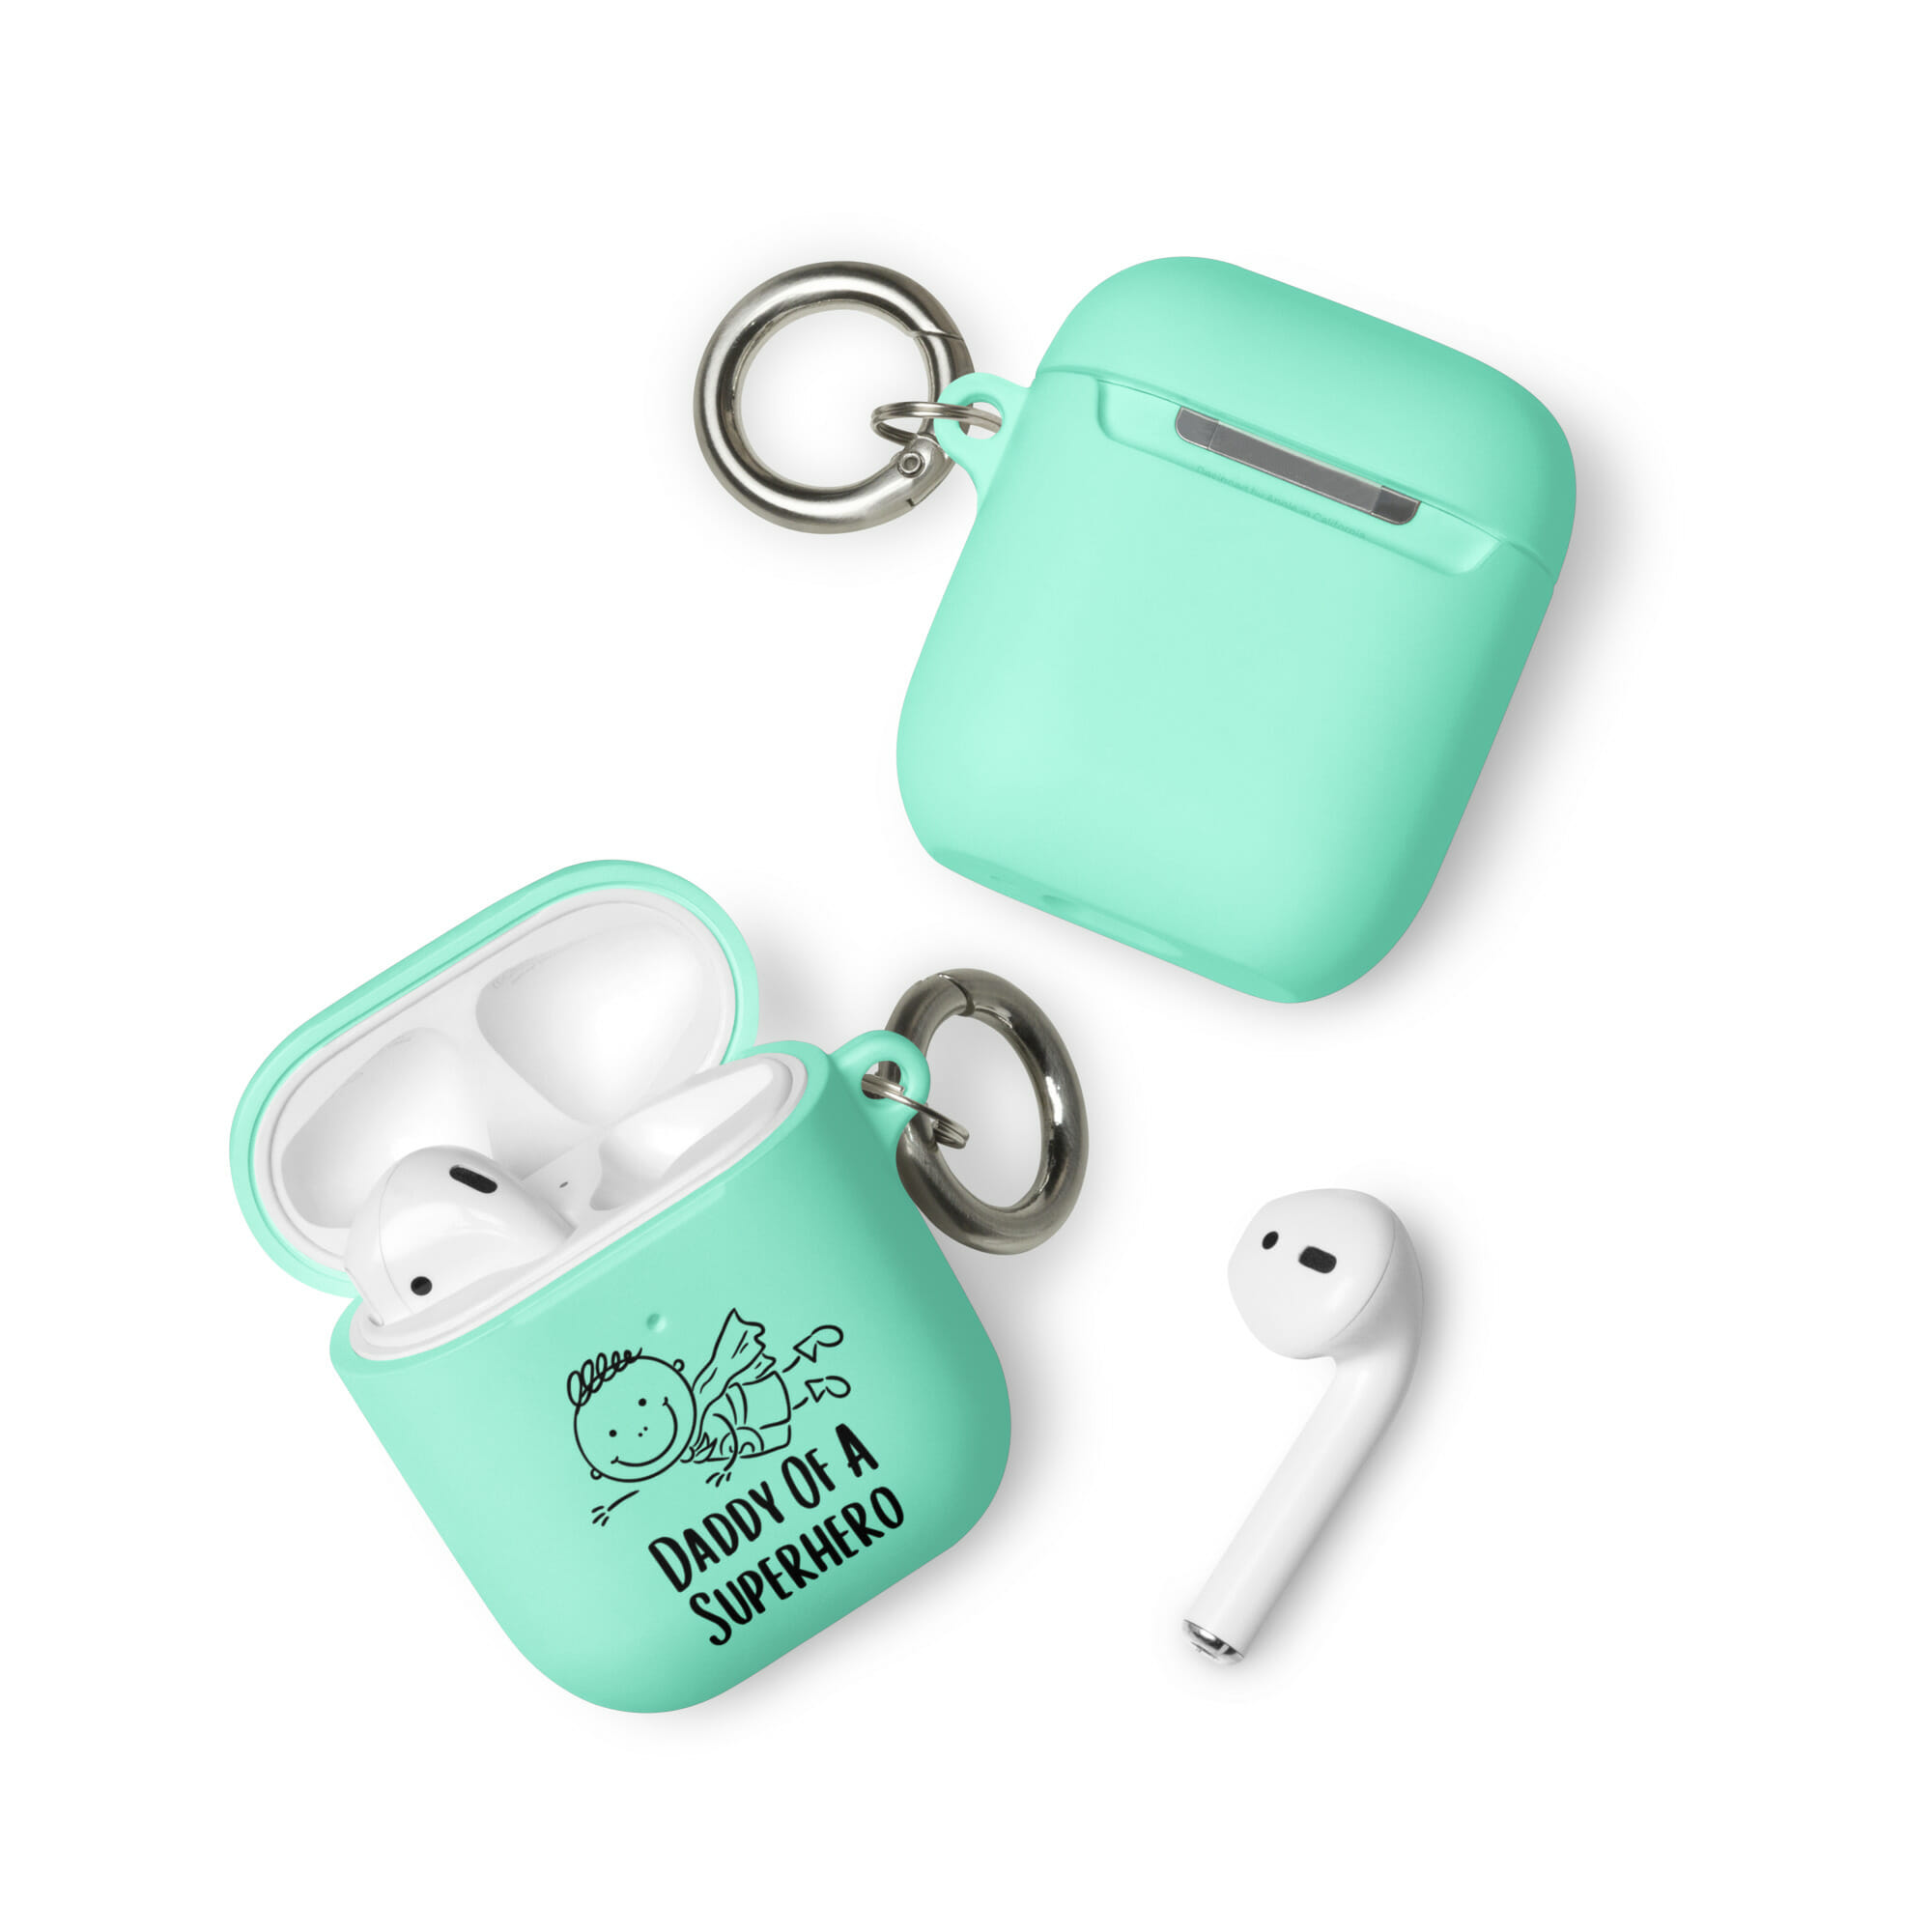 rubber-case-for-airpods-mint-airpods-front-647aff88b861f.jpg